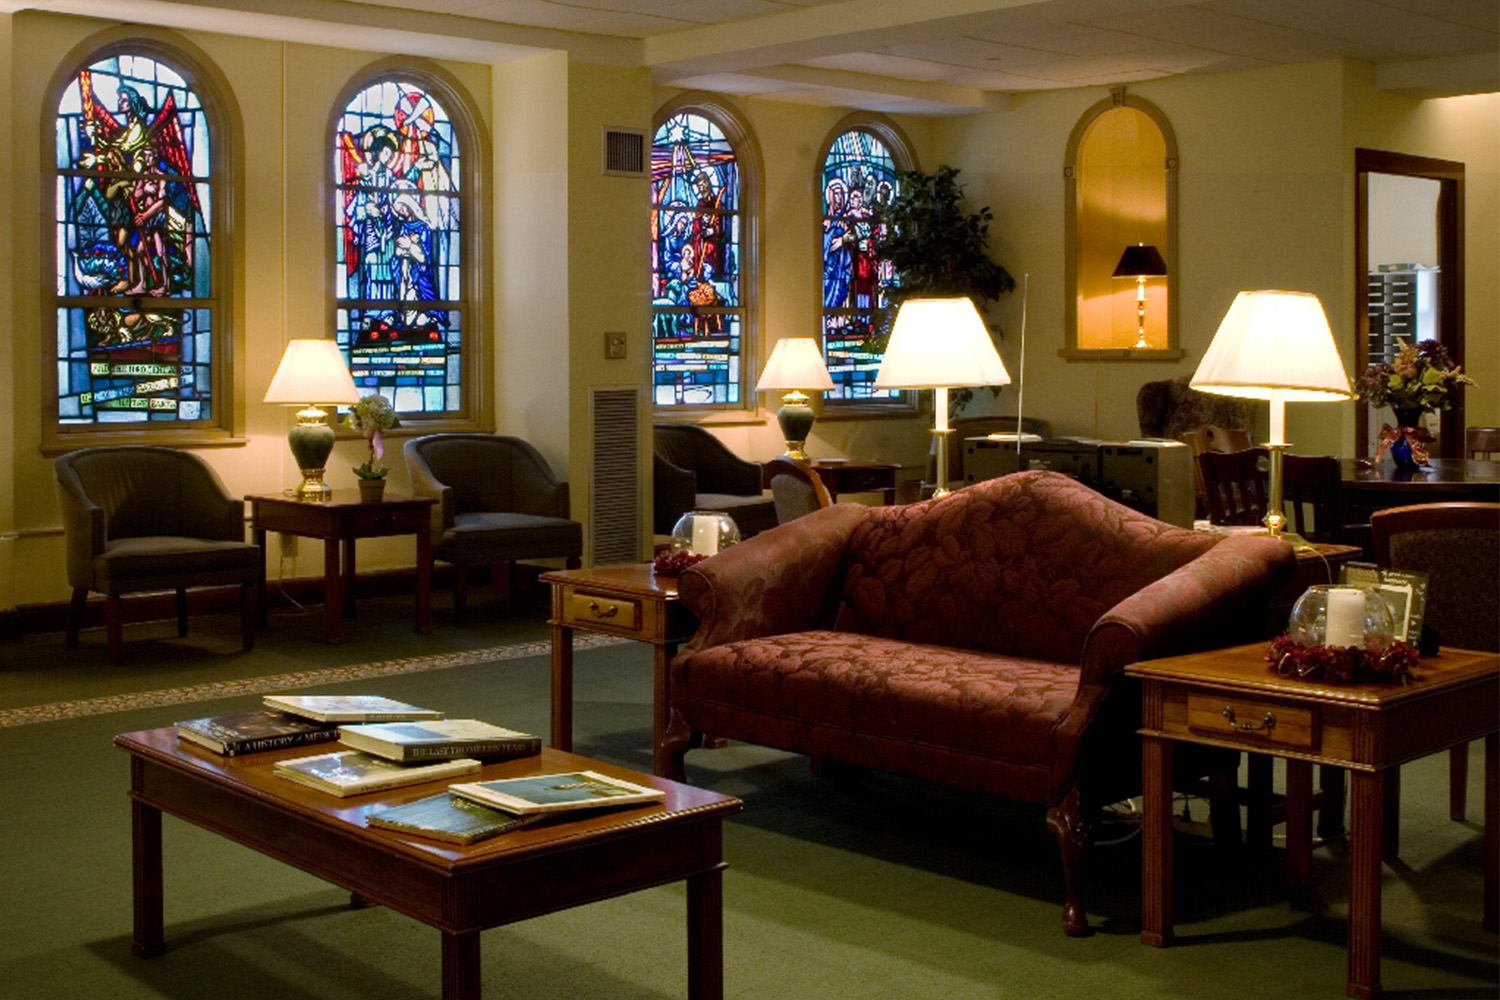 Lobby area with vintage red couch and stained glass windows 